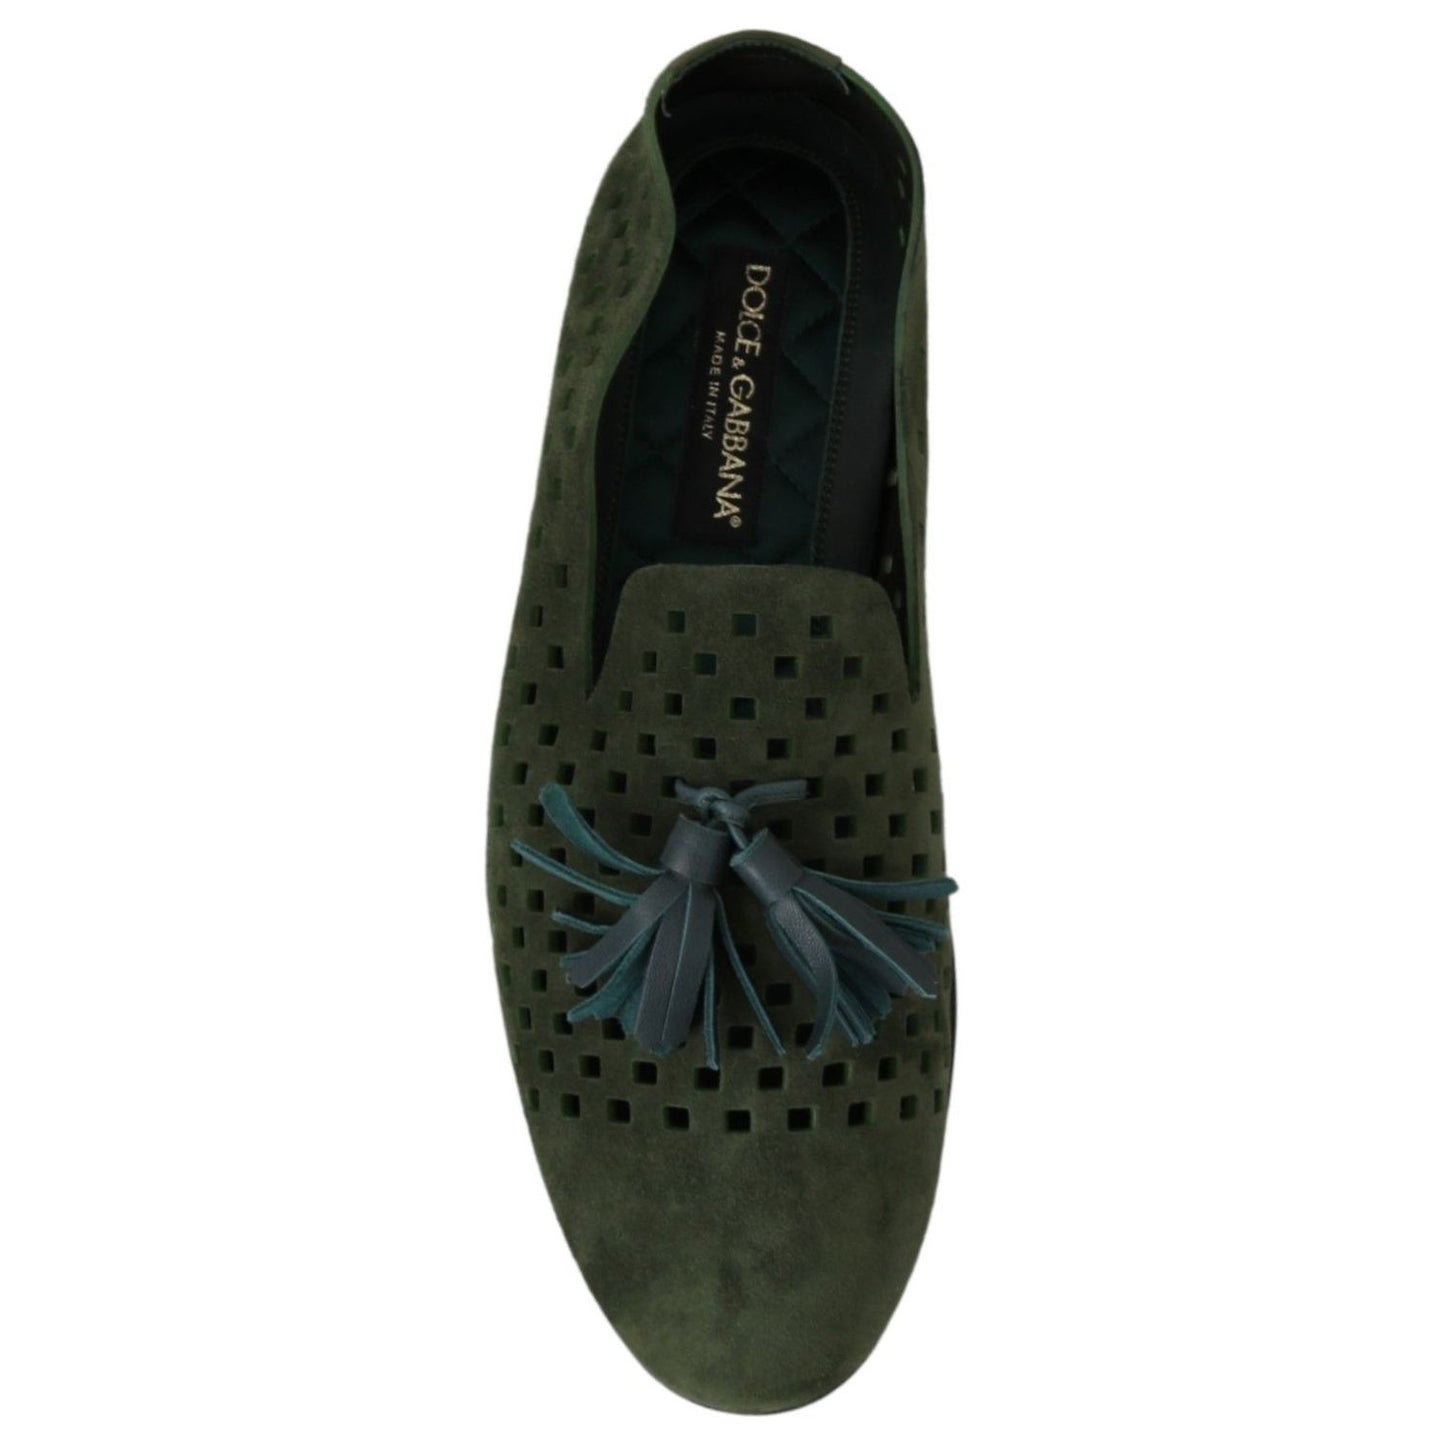 Dolce & Gabbana Elegant Green Suede Loafers for Men green-suede-breathable-slippers-loafers-shoes